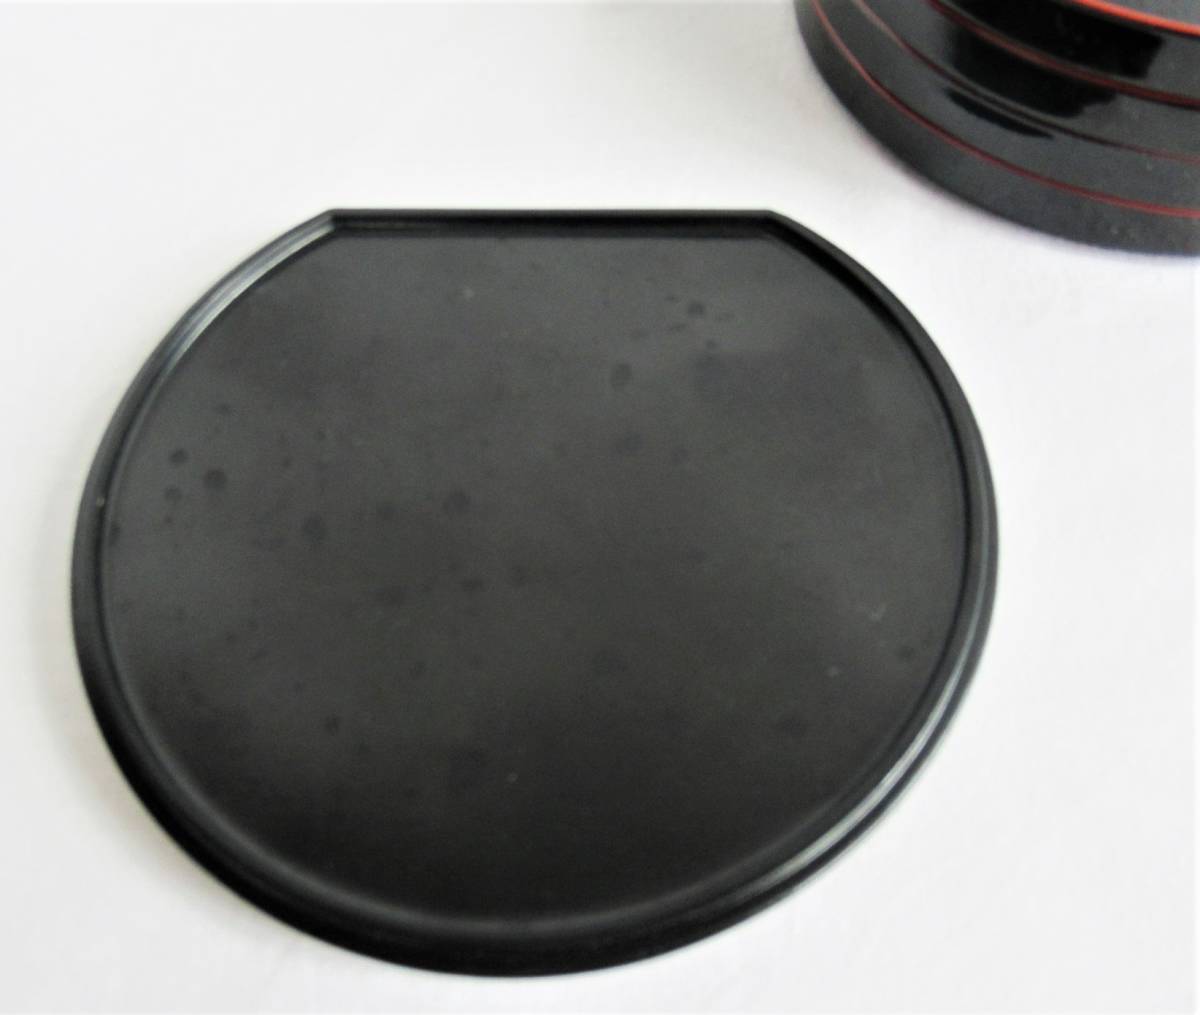  half month . seat serving tray 5 customer . stone Japanese-style tableware peak plate half month tray Mini O-Bon . customer for tableware plate . stone cooking tea utensils compound lacquer ware 